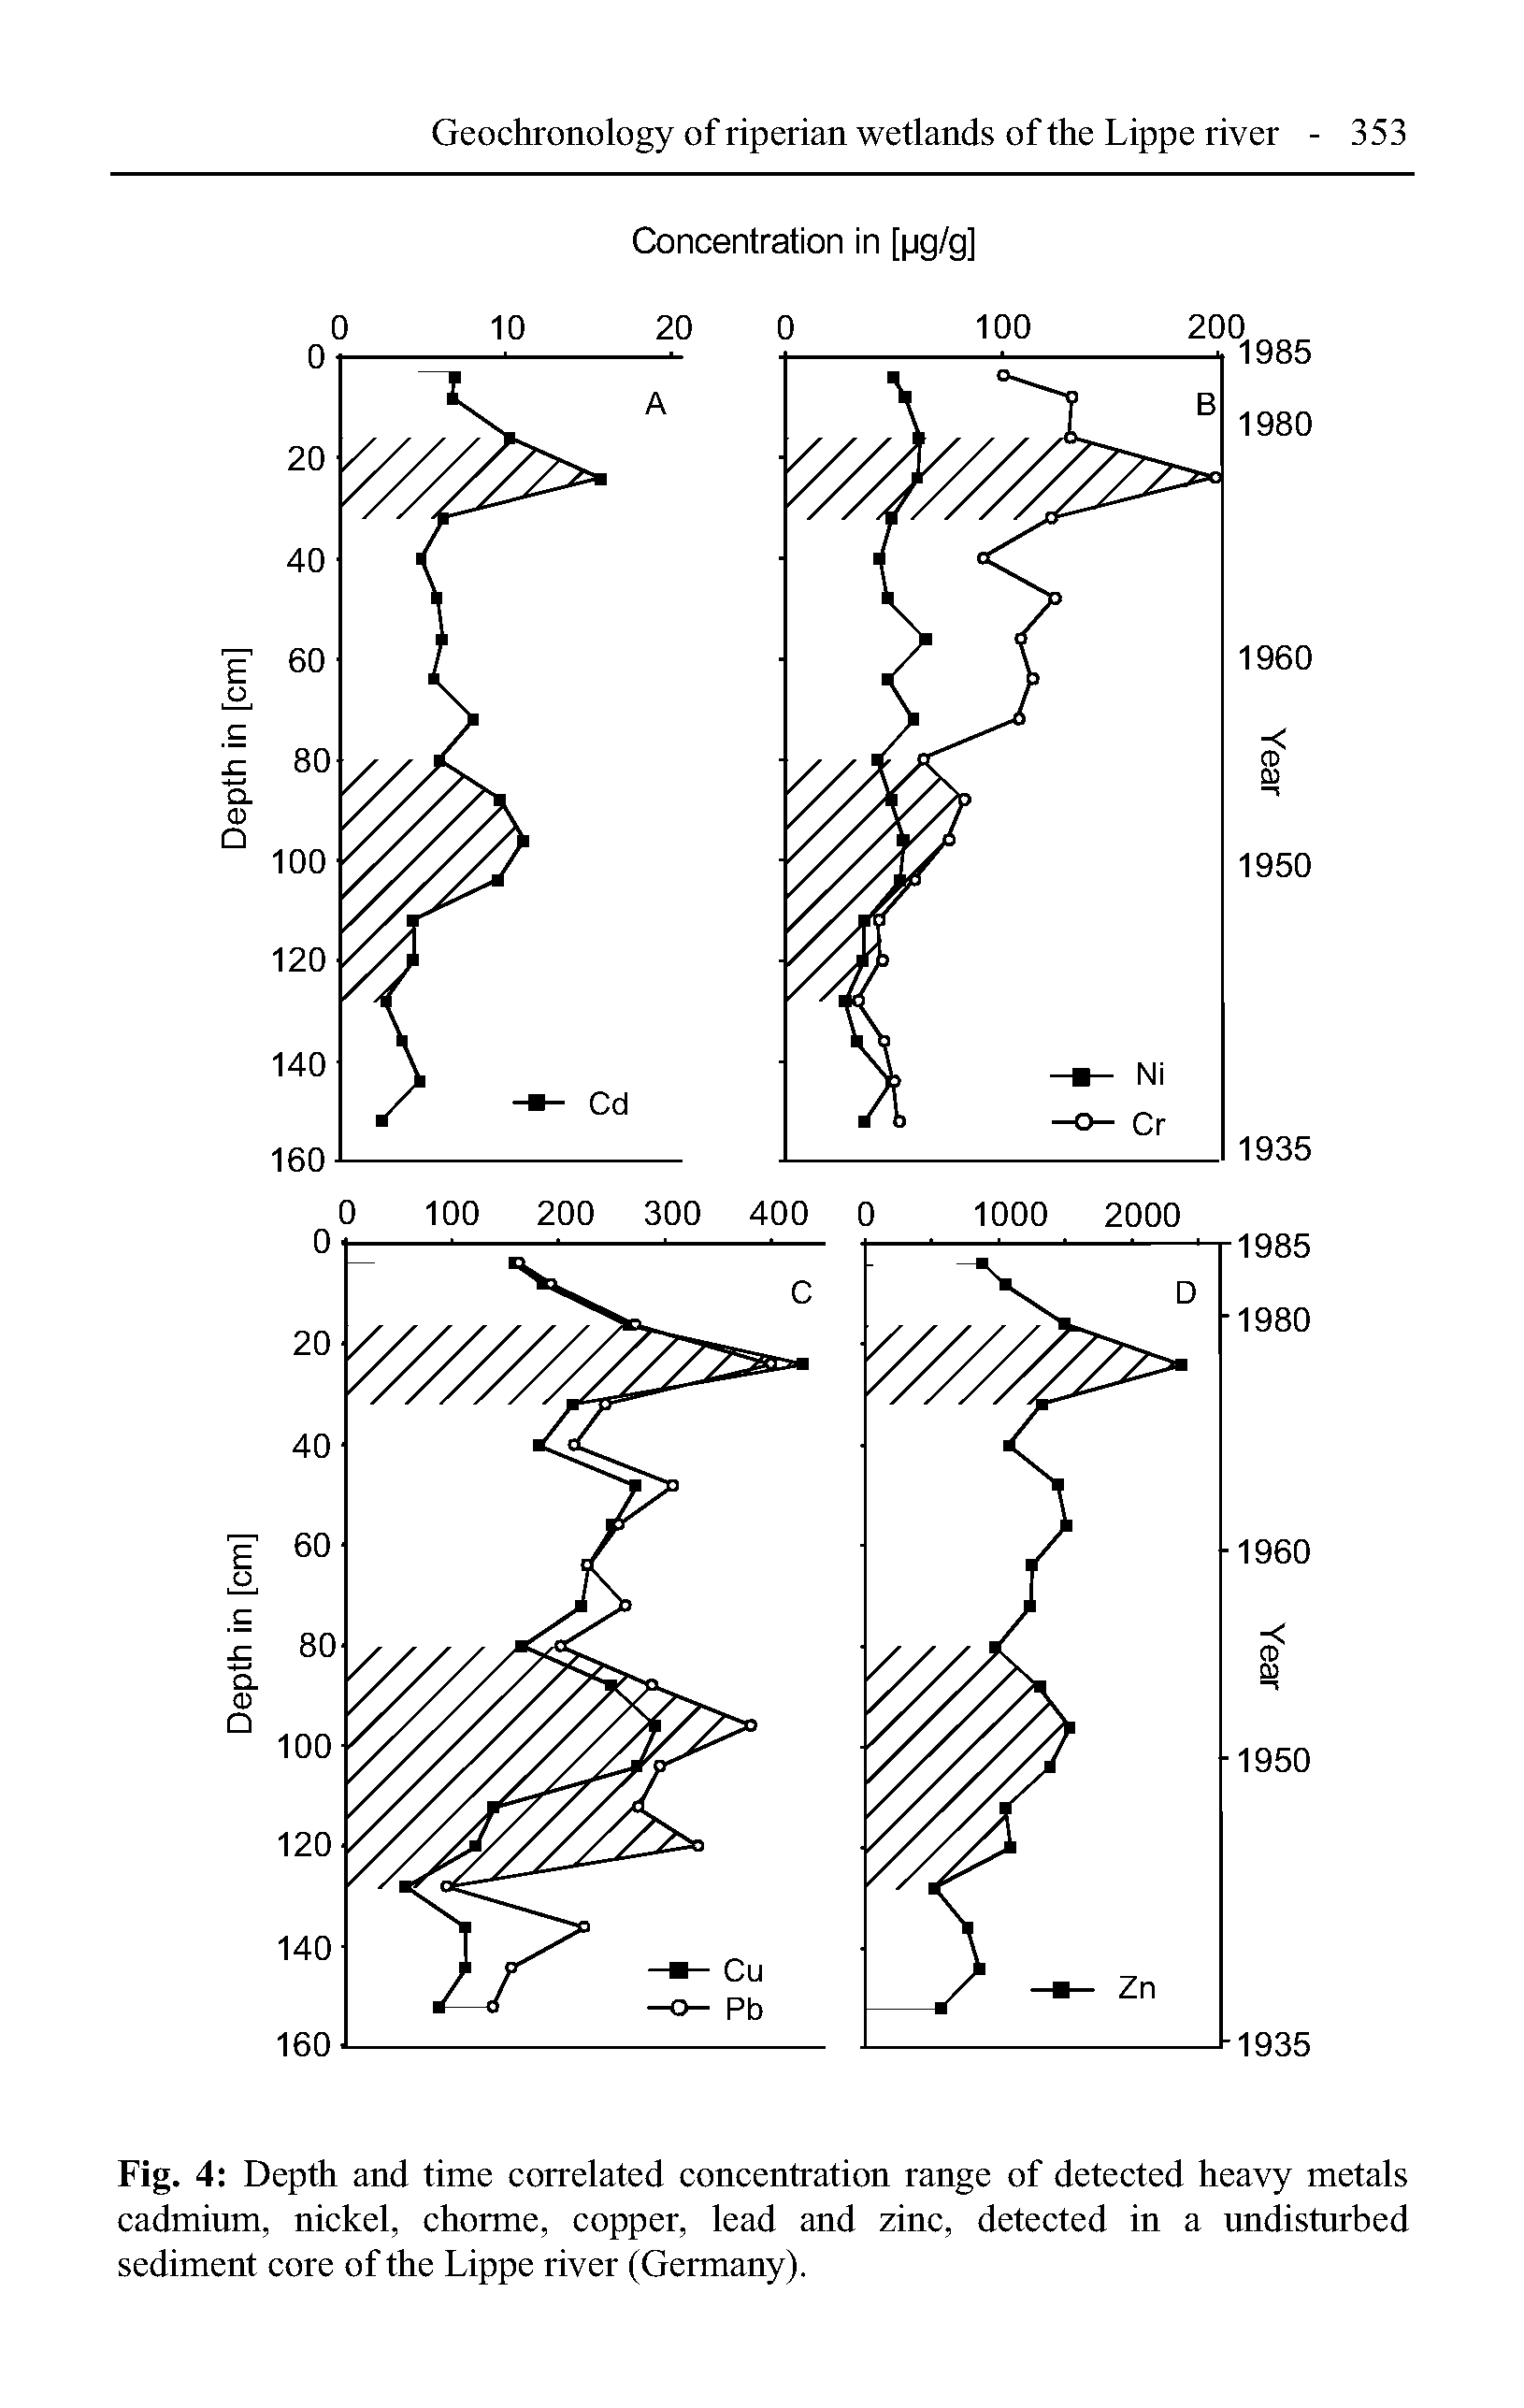 Fig. 4 Depth and time correlated concentration range of detected heavy metals cadmium, nickel, chorme, copper, lead and zinc, detected in a undisturbed sediment core of the Lippe river (Germany).